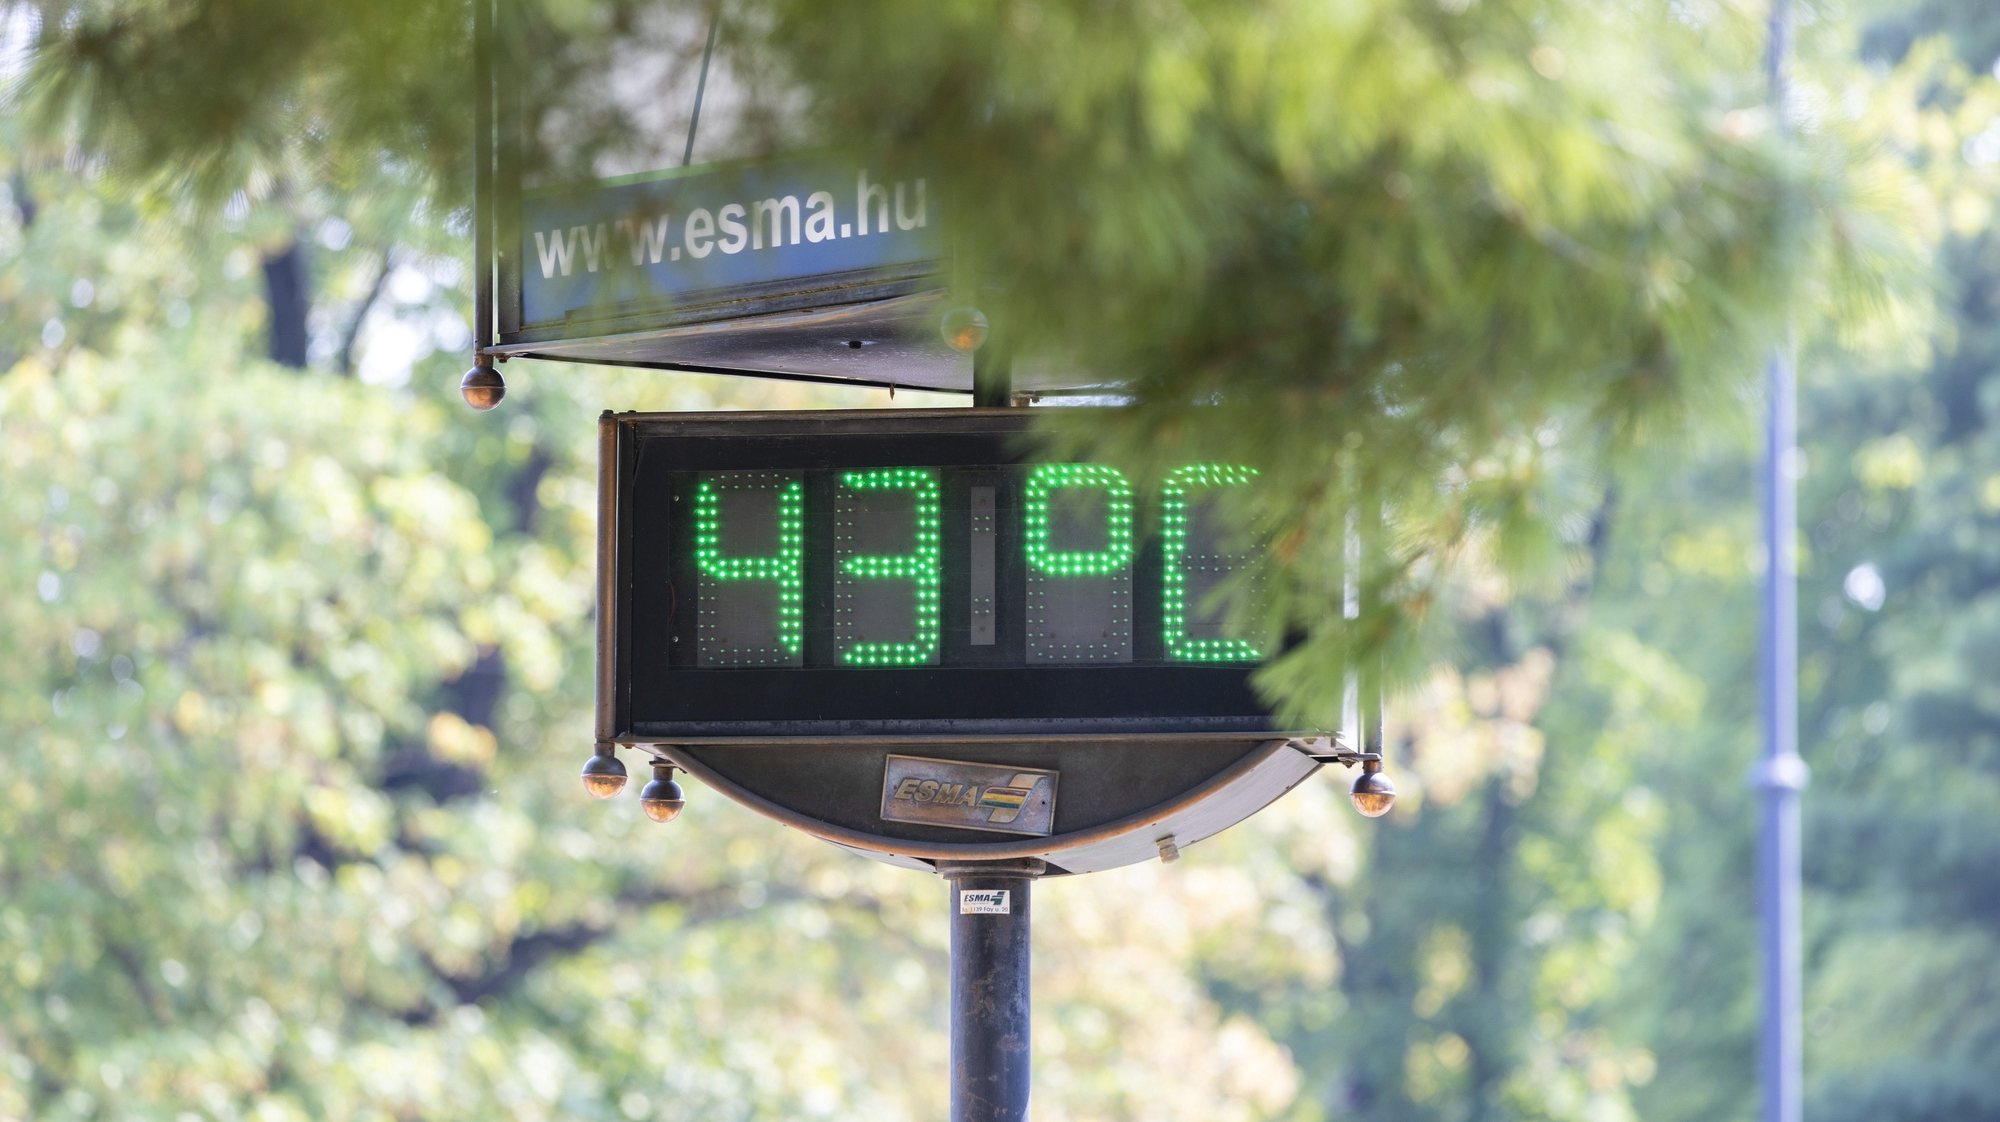 epa10088219 A digital street thermometer displays the air temperature at 43 degrees Celsius, in Nagykanizsa, southwestern Hungary, 23 July 2022. The current heatwave in Hungary is expected to peak on 23 July, when temperatures have exceeded the 40 degrees Celsius mark in several parts of the country.  EPA/Gyorgy Varga HUNGARY OUT